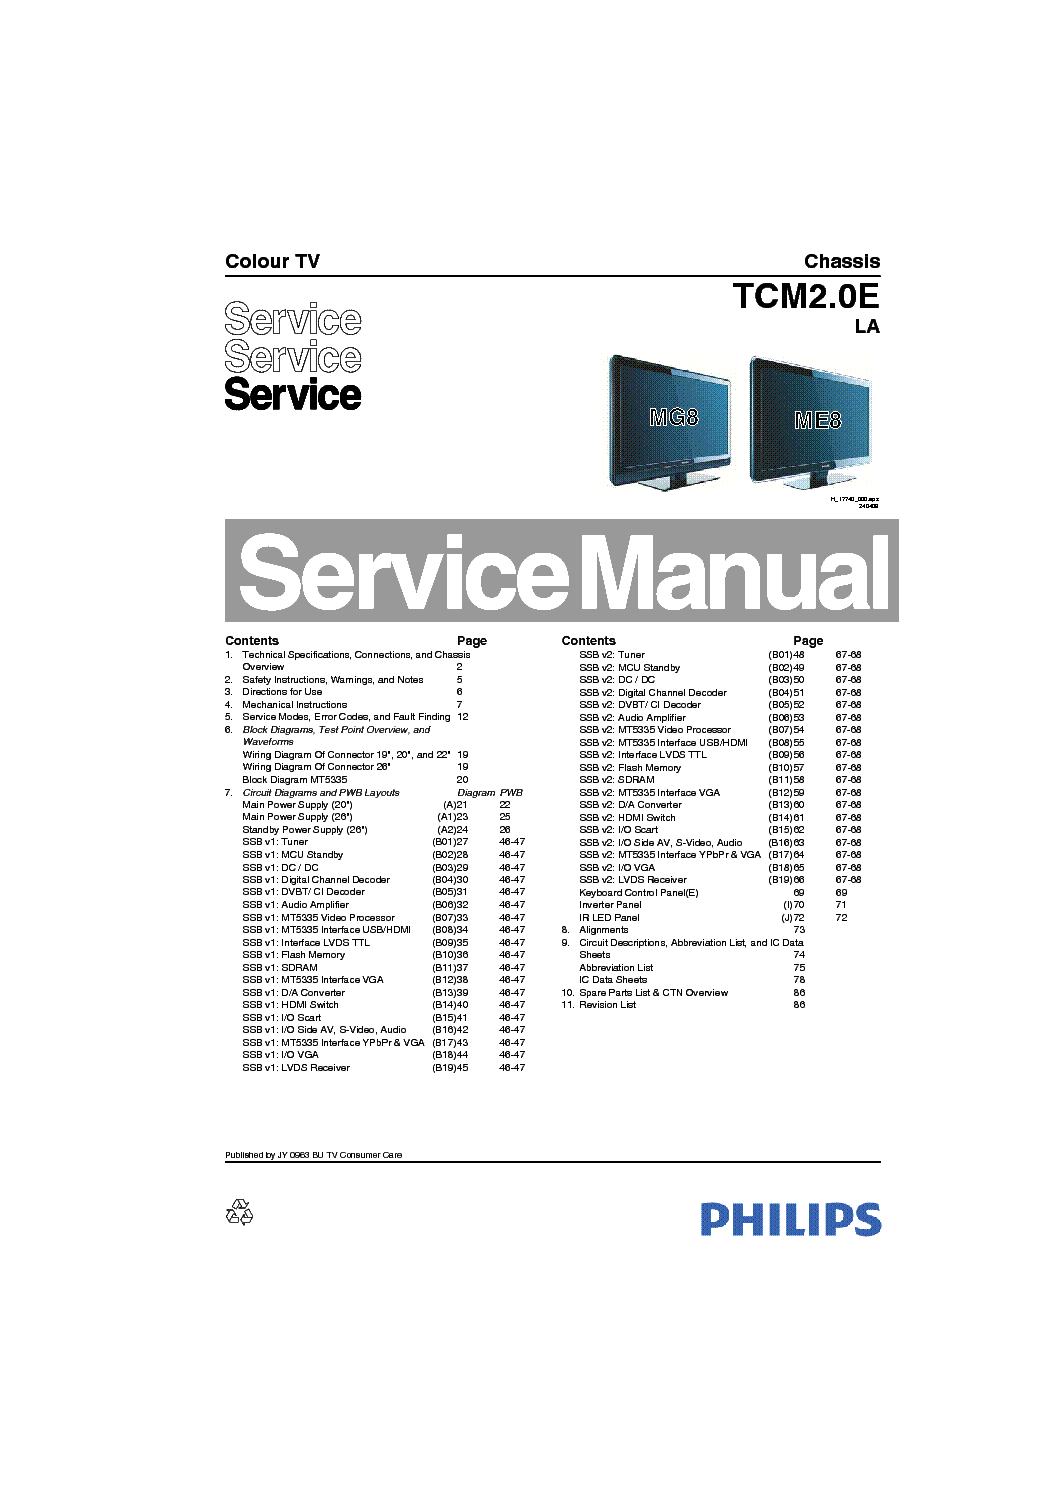 PHILIPS TCM2.0E LA CHASSIS LCD TV SM service manual (1st page)